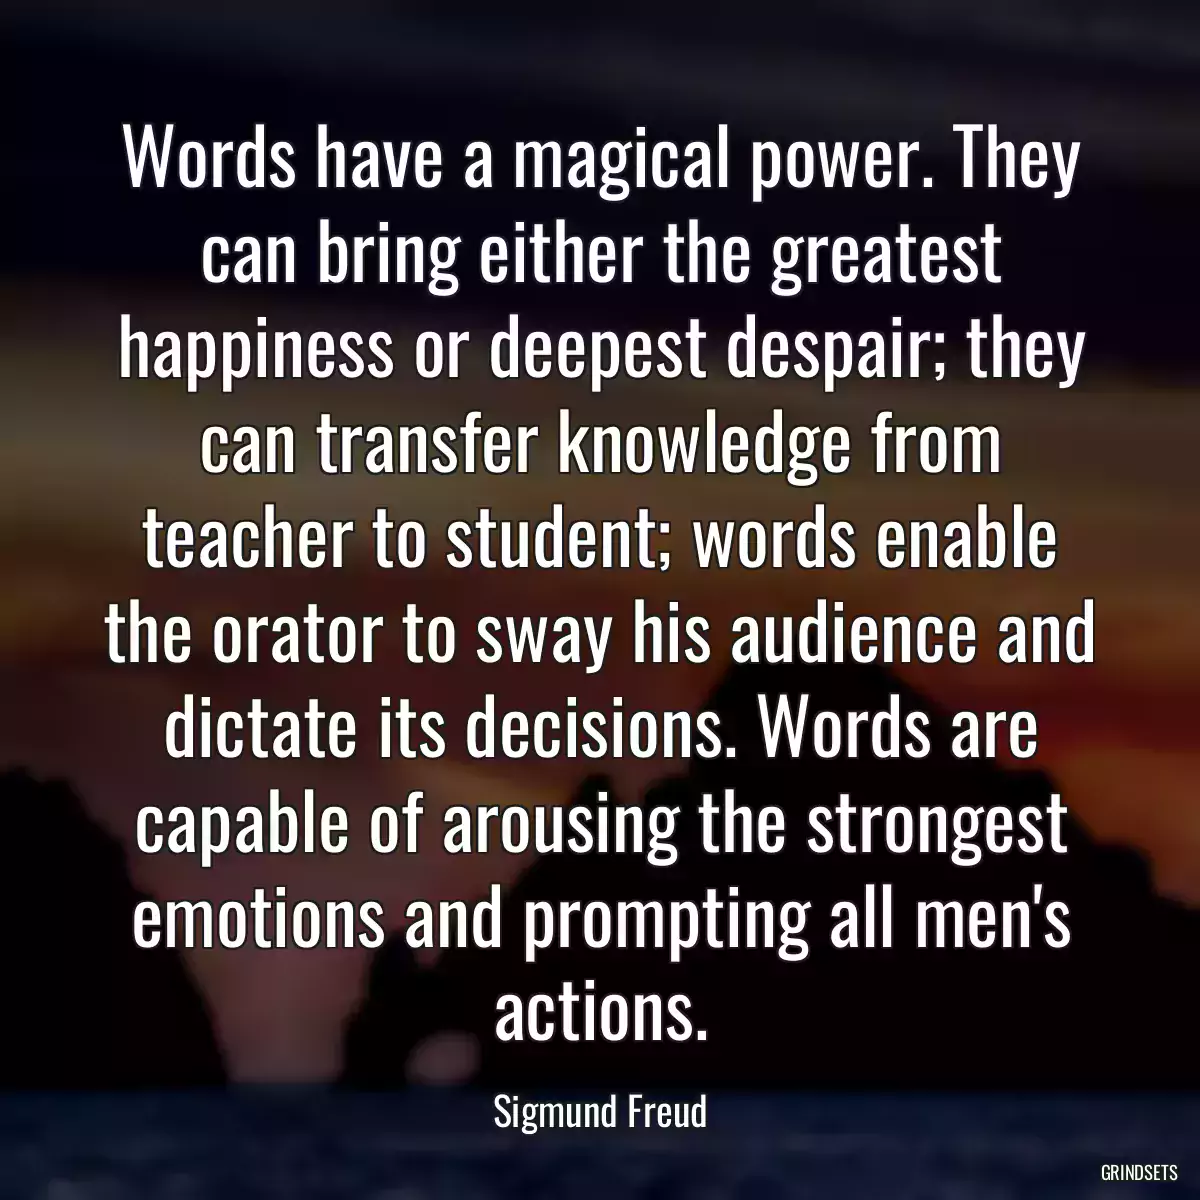 Words have a magical power. They can bring either the greatest happiness or deepest despair; they can transfer knowledge from teacher to student; words enable the orator to sway his audience and dictate its decisions. Words are capable of arousing the strongest emotions and prompting all men\'s actions.